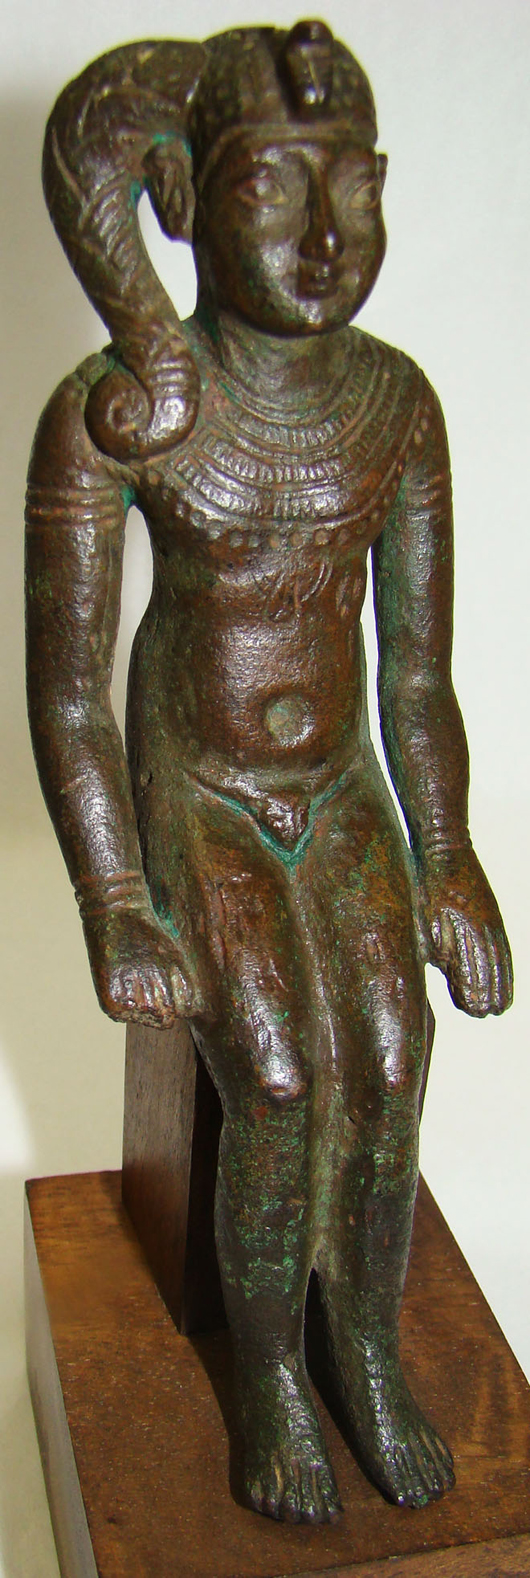 This Egyptian bronze statue of the child Horus is from the 26th-30th Dynasties. Ex. Royal Athena Gallery in New York, the 4 3/4-inch figure has a $9,000-11,000 estimate. Image courtesy of Malter Galleries Inc.